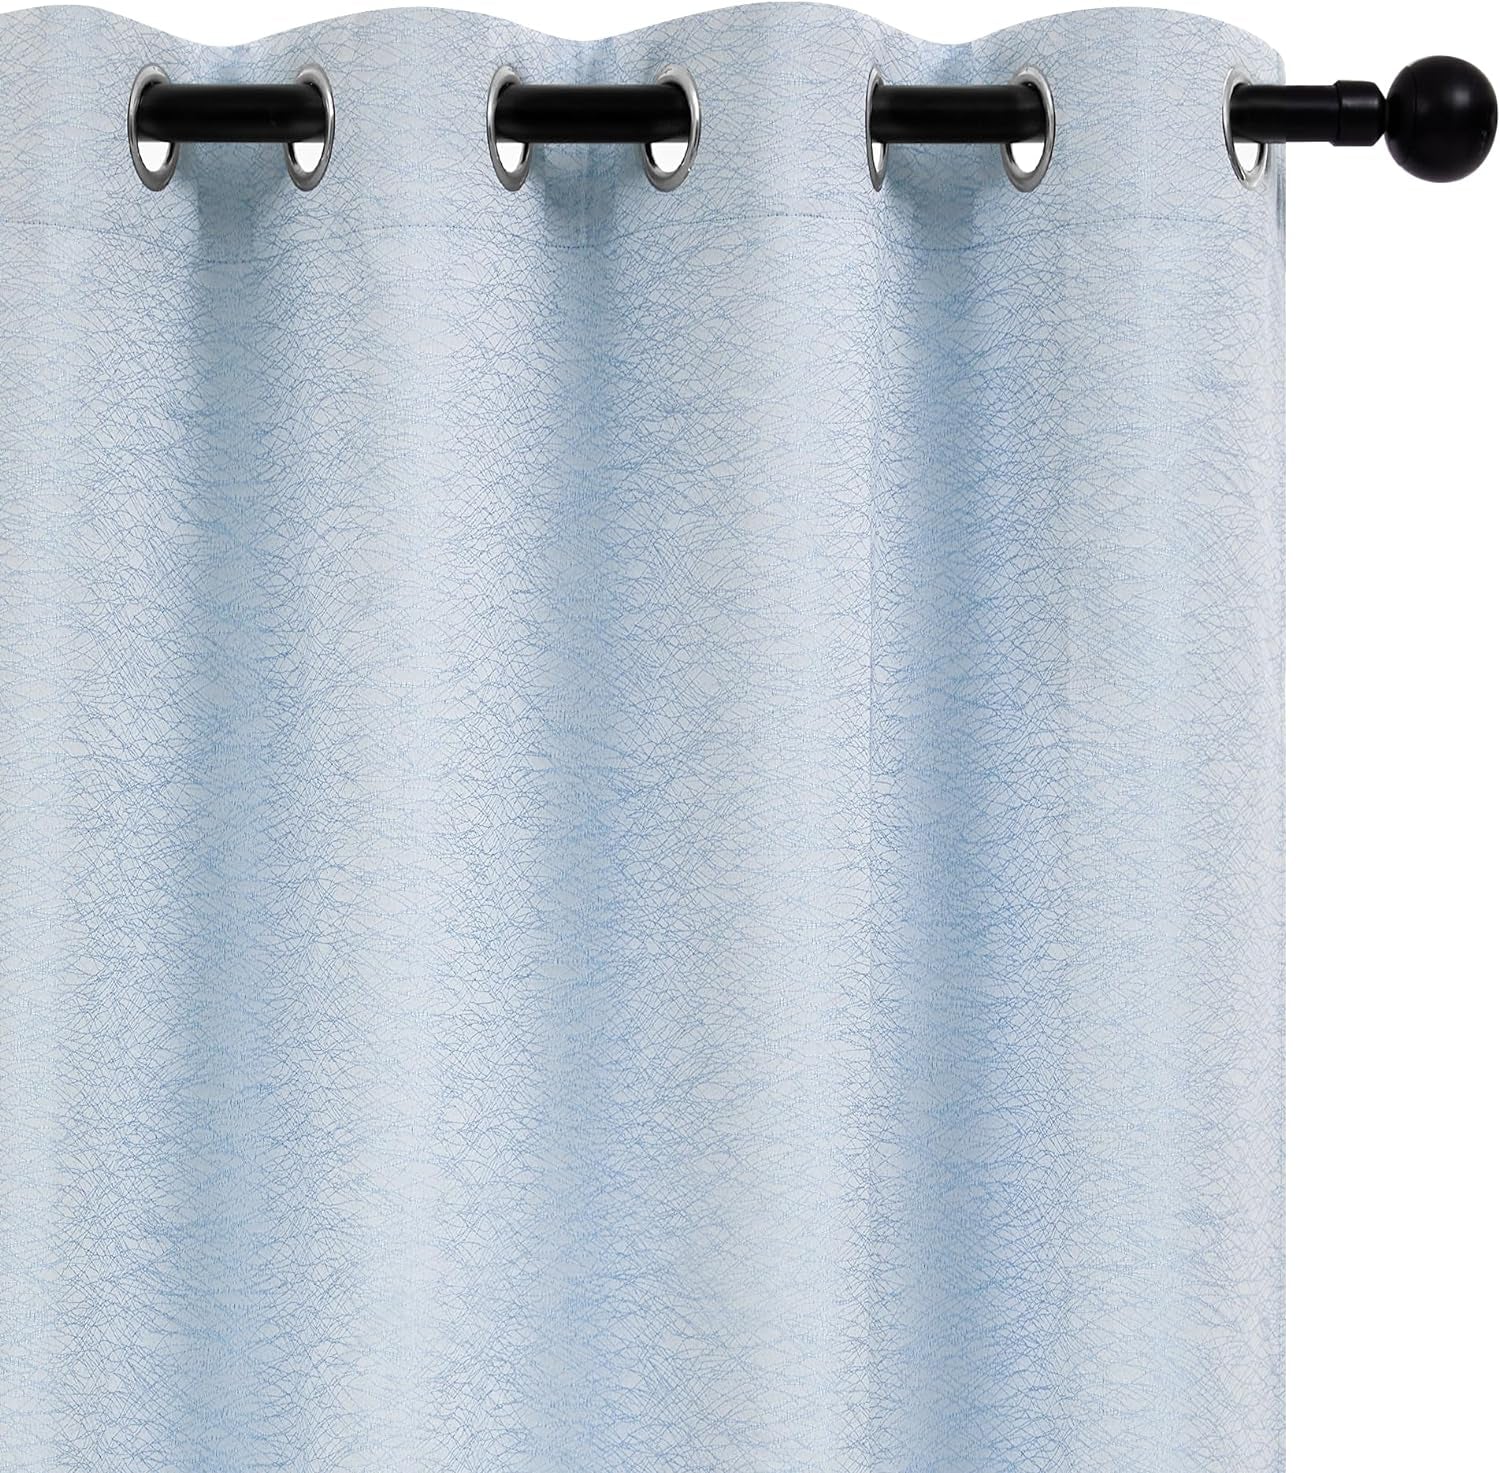 Deconovo 100% Blackout Curtains, Linen Noise Reducing Curtains for Bedroom, Thermal Insulated Living Room Curtain Drapes for Windows (Grey, 2 Panels, 52X72 Inch)  Deconovo   